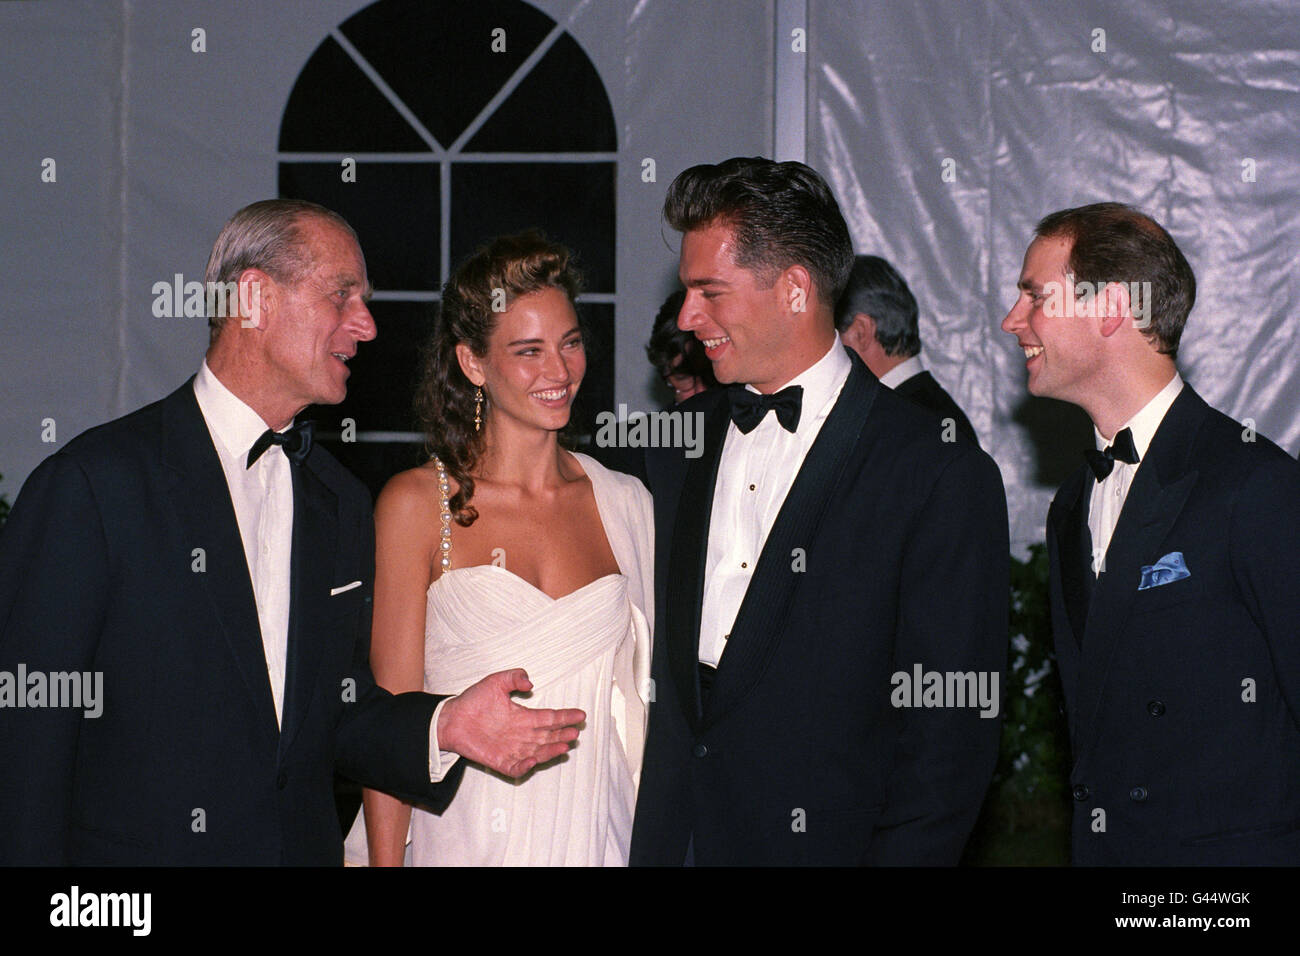 The Duke of Edinburgh and Prince Edward chat with American musician and singer Harry Connick Jnr and his girlfriend, Jill Goodacre before a gala dinner in the grounds of Windsor Castle to celebrate the Duke's 70th birthday and to raise funds for his charities. Stock Photo